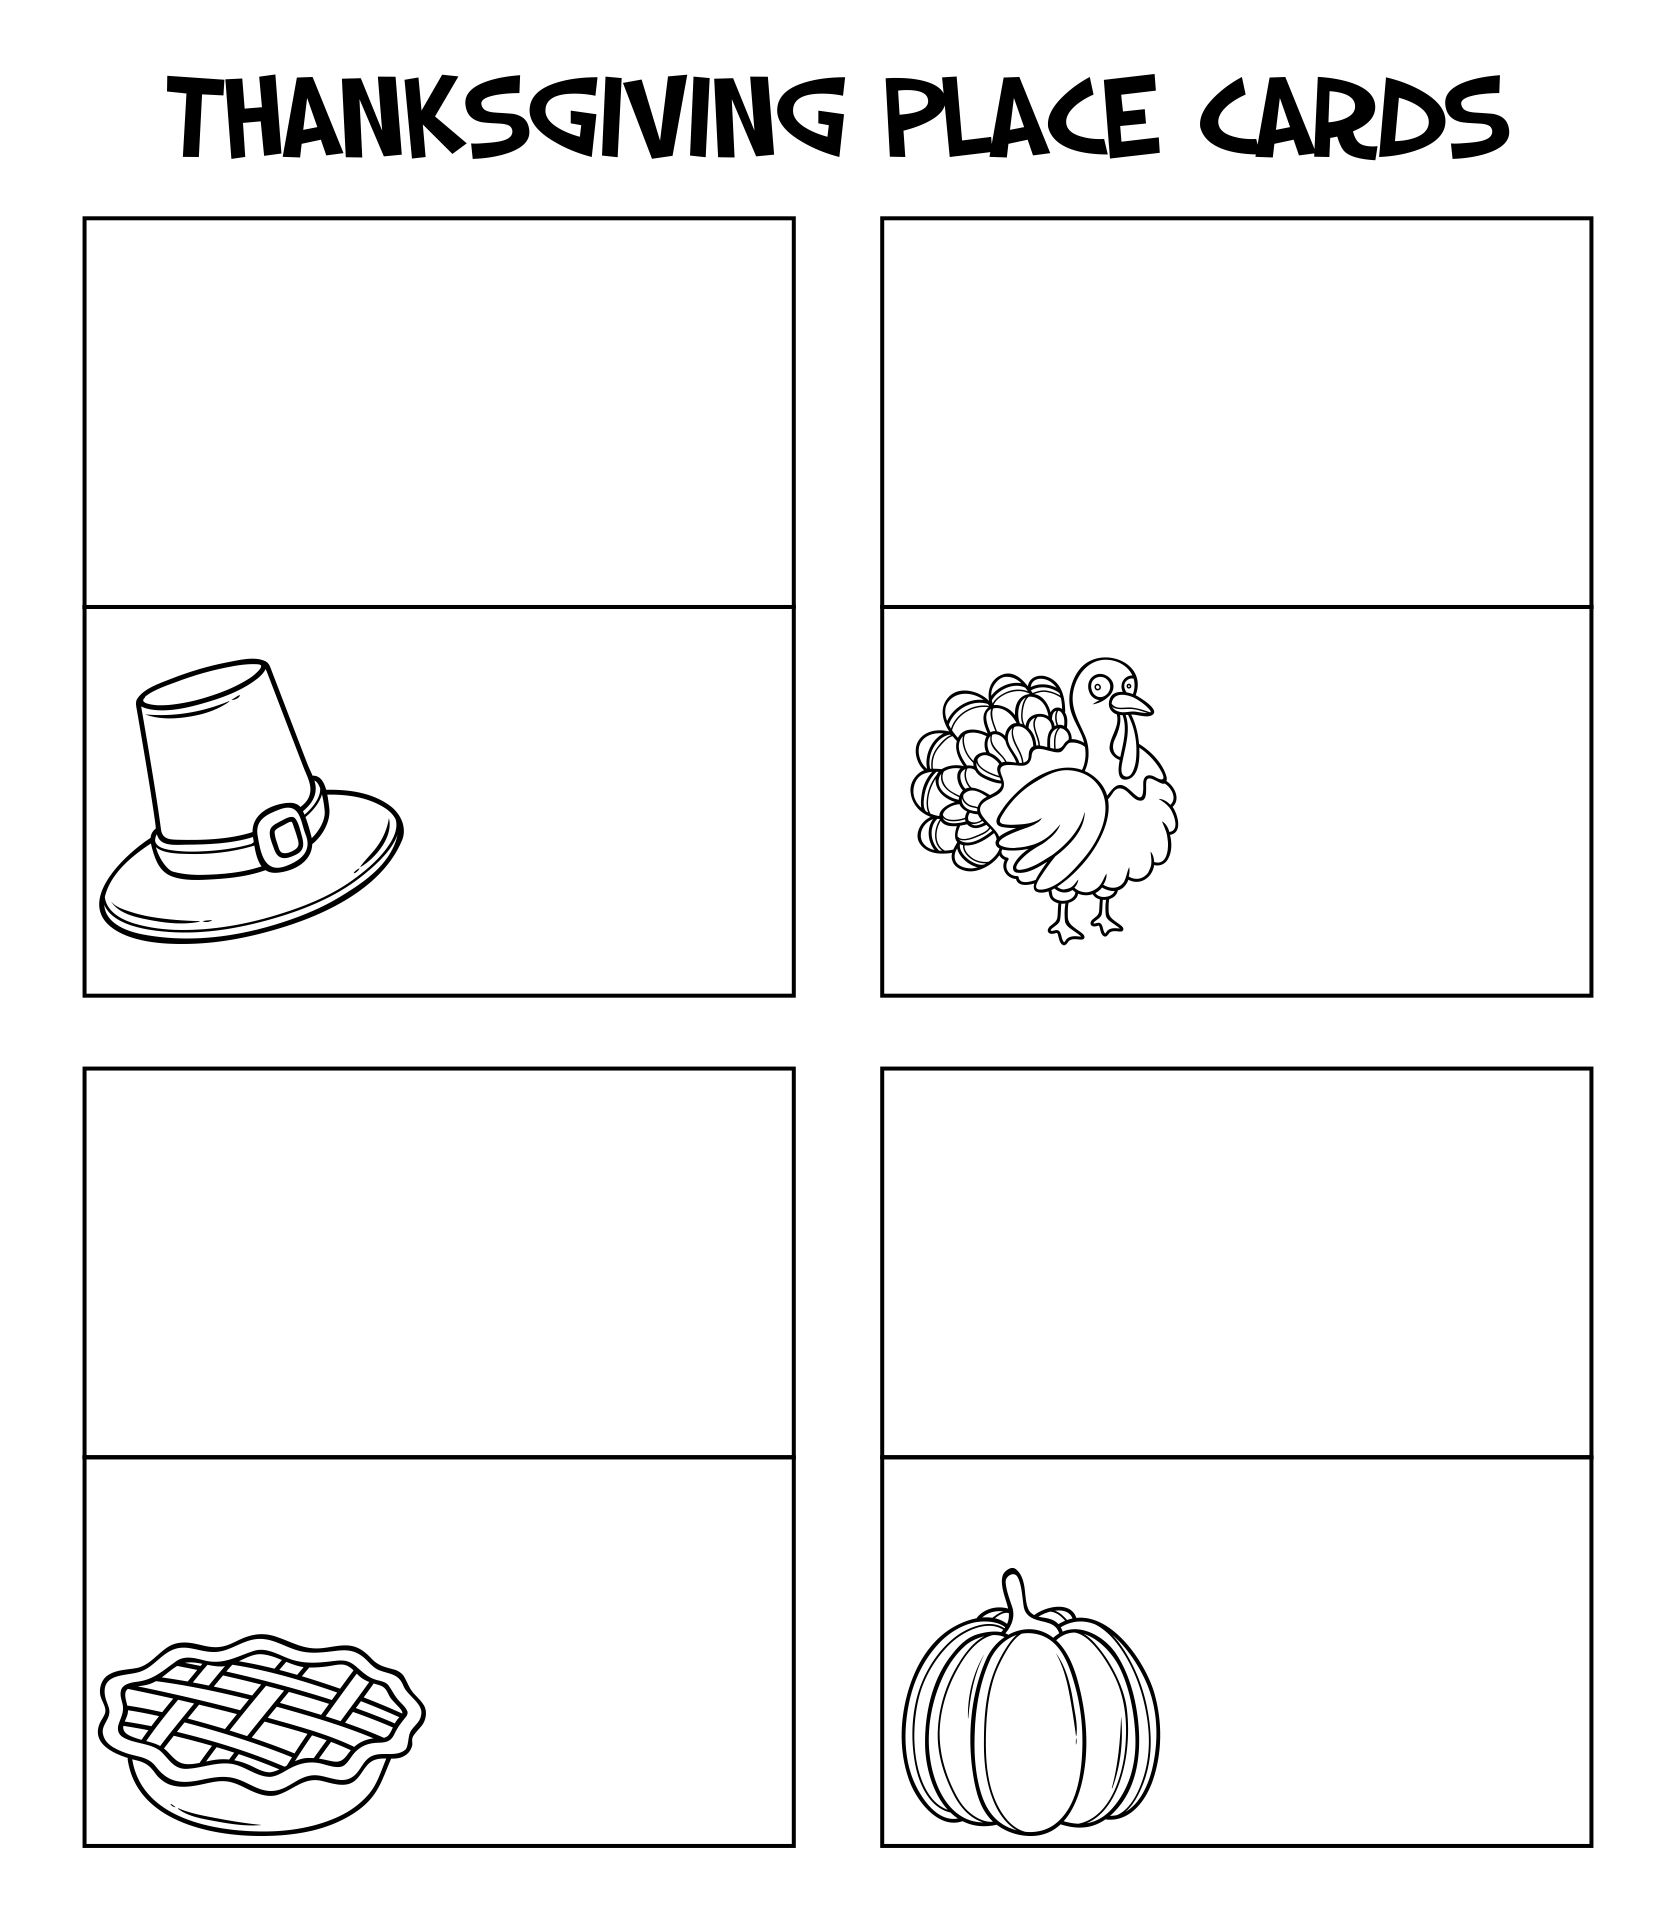 Printable Thanksgiving Place Cards To Color